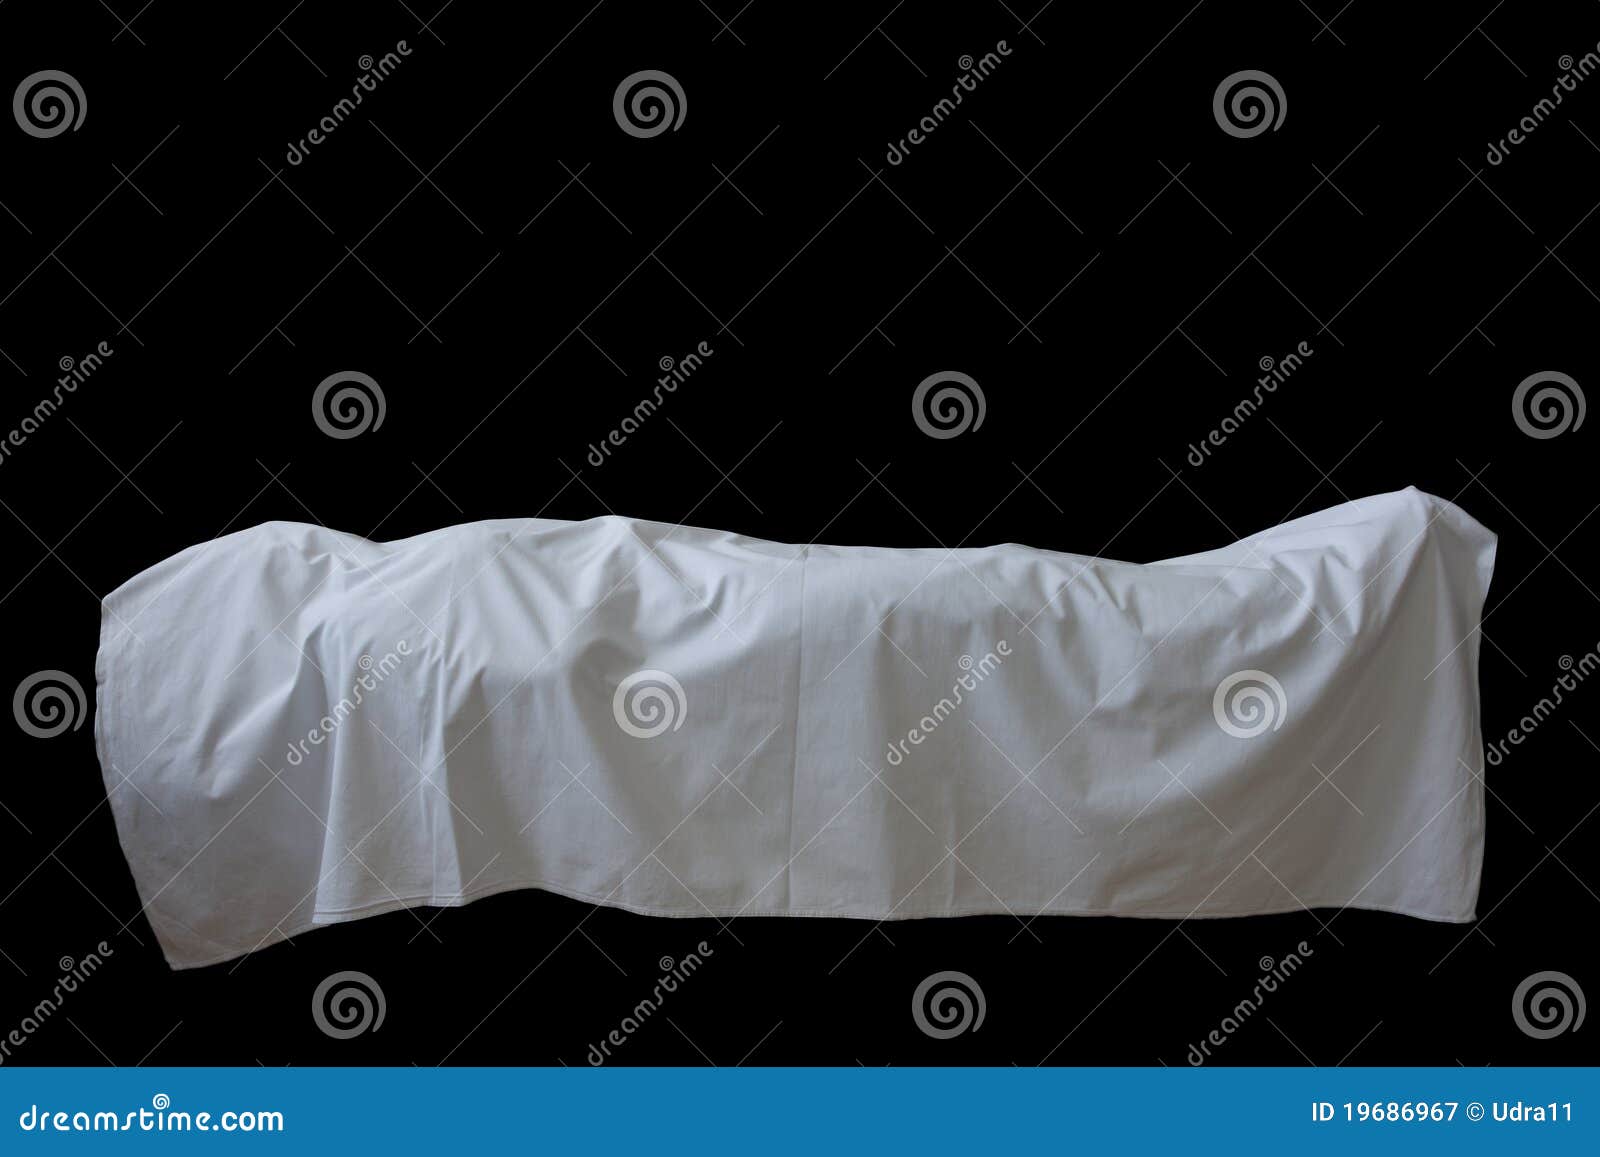 Abstract Of Dead Body Royalty Free Stock Photography - Image: 19686967